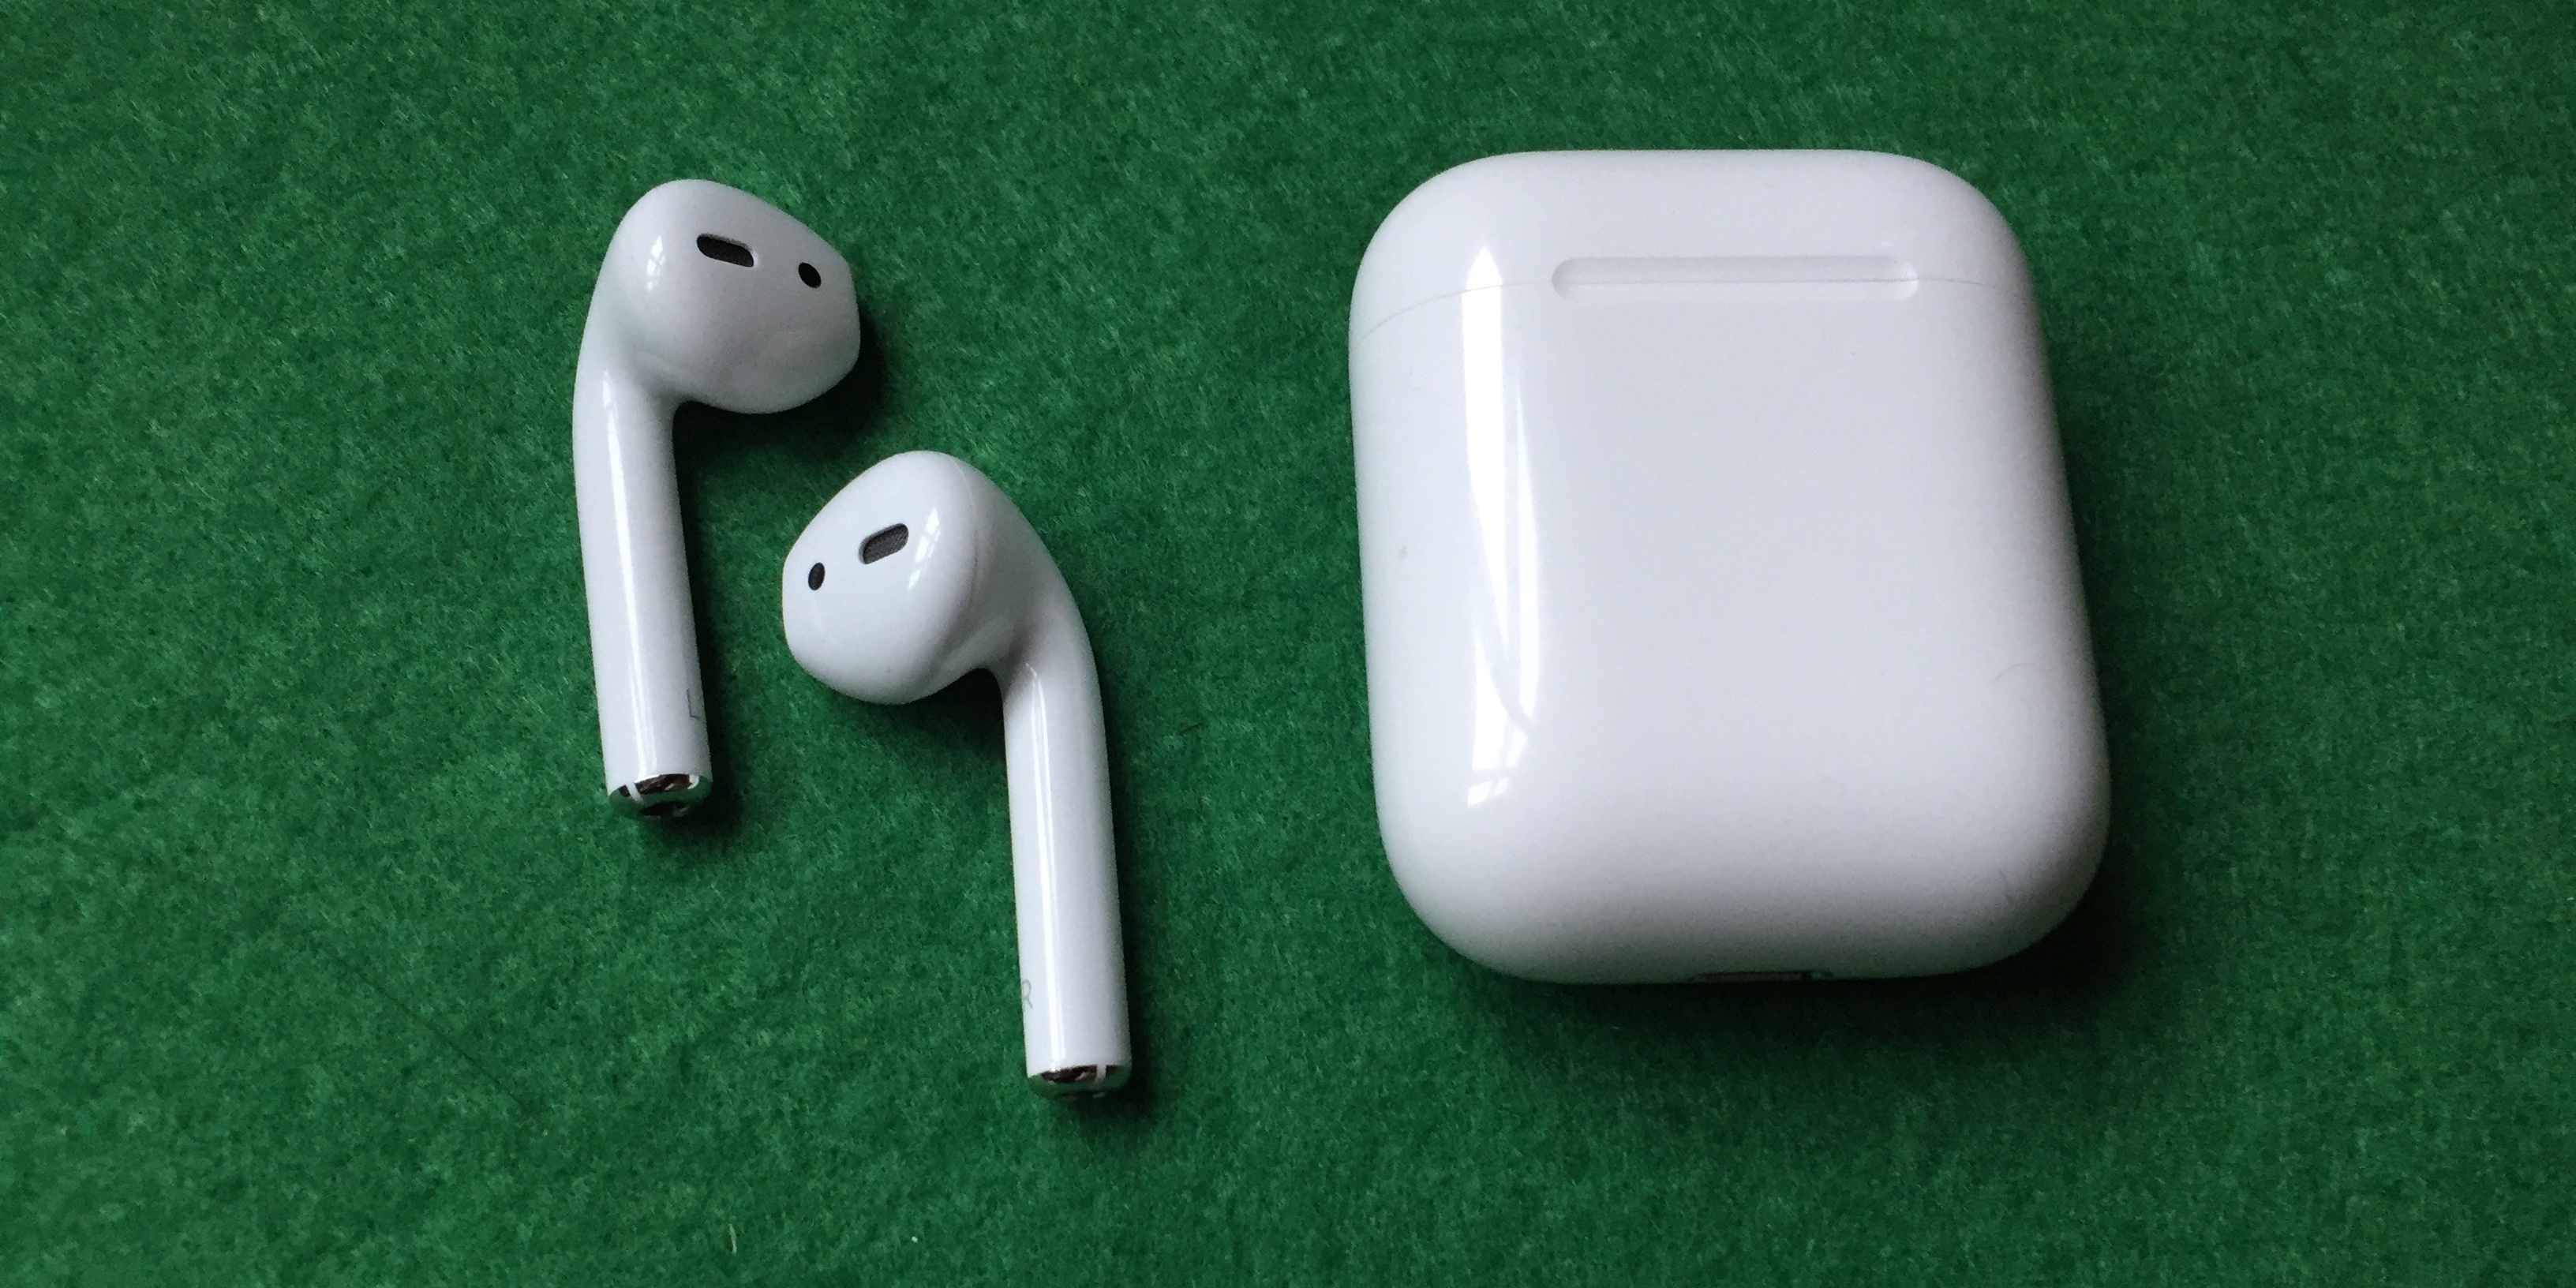 imod chokerende klinke Hands-on review: Apple AirPods sound quality, pairing, auto-pause, Siri and  more - 9to5Mac